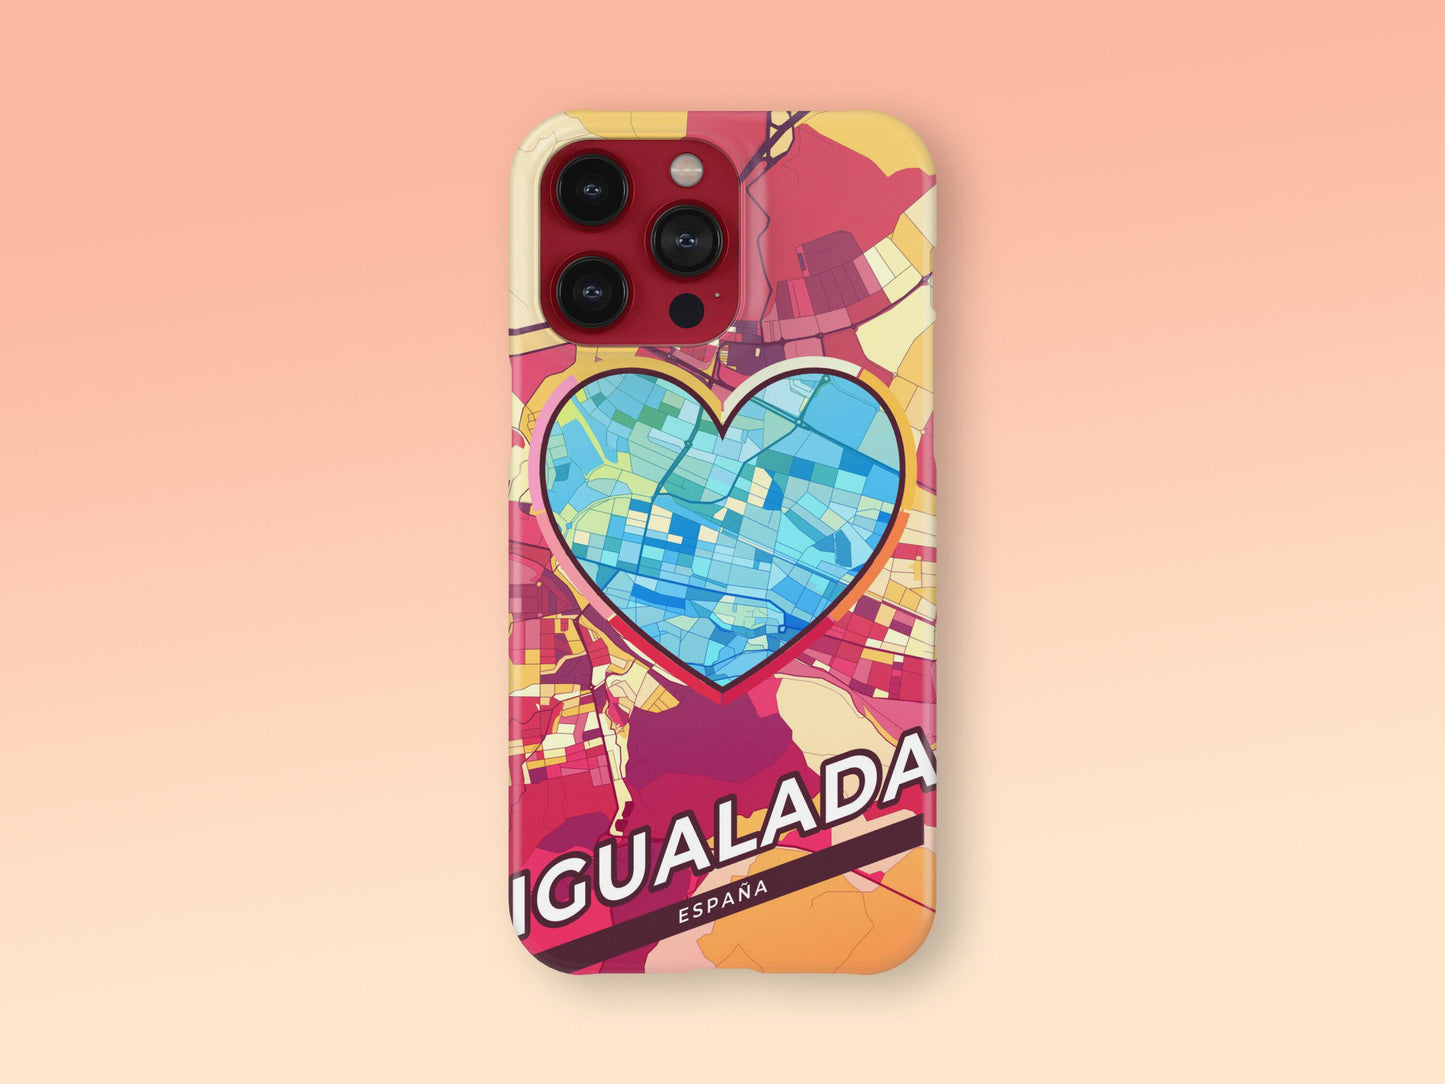 Igualada Spain slim phone case with colorful icon. Birthday, wedding or housewarming gift. Couple match cases. 2